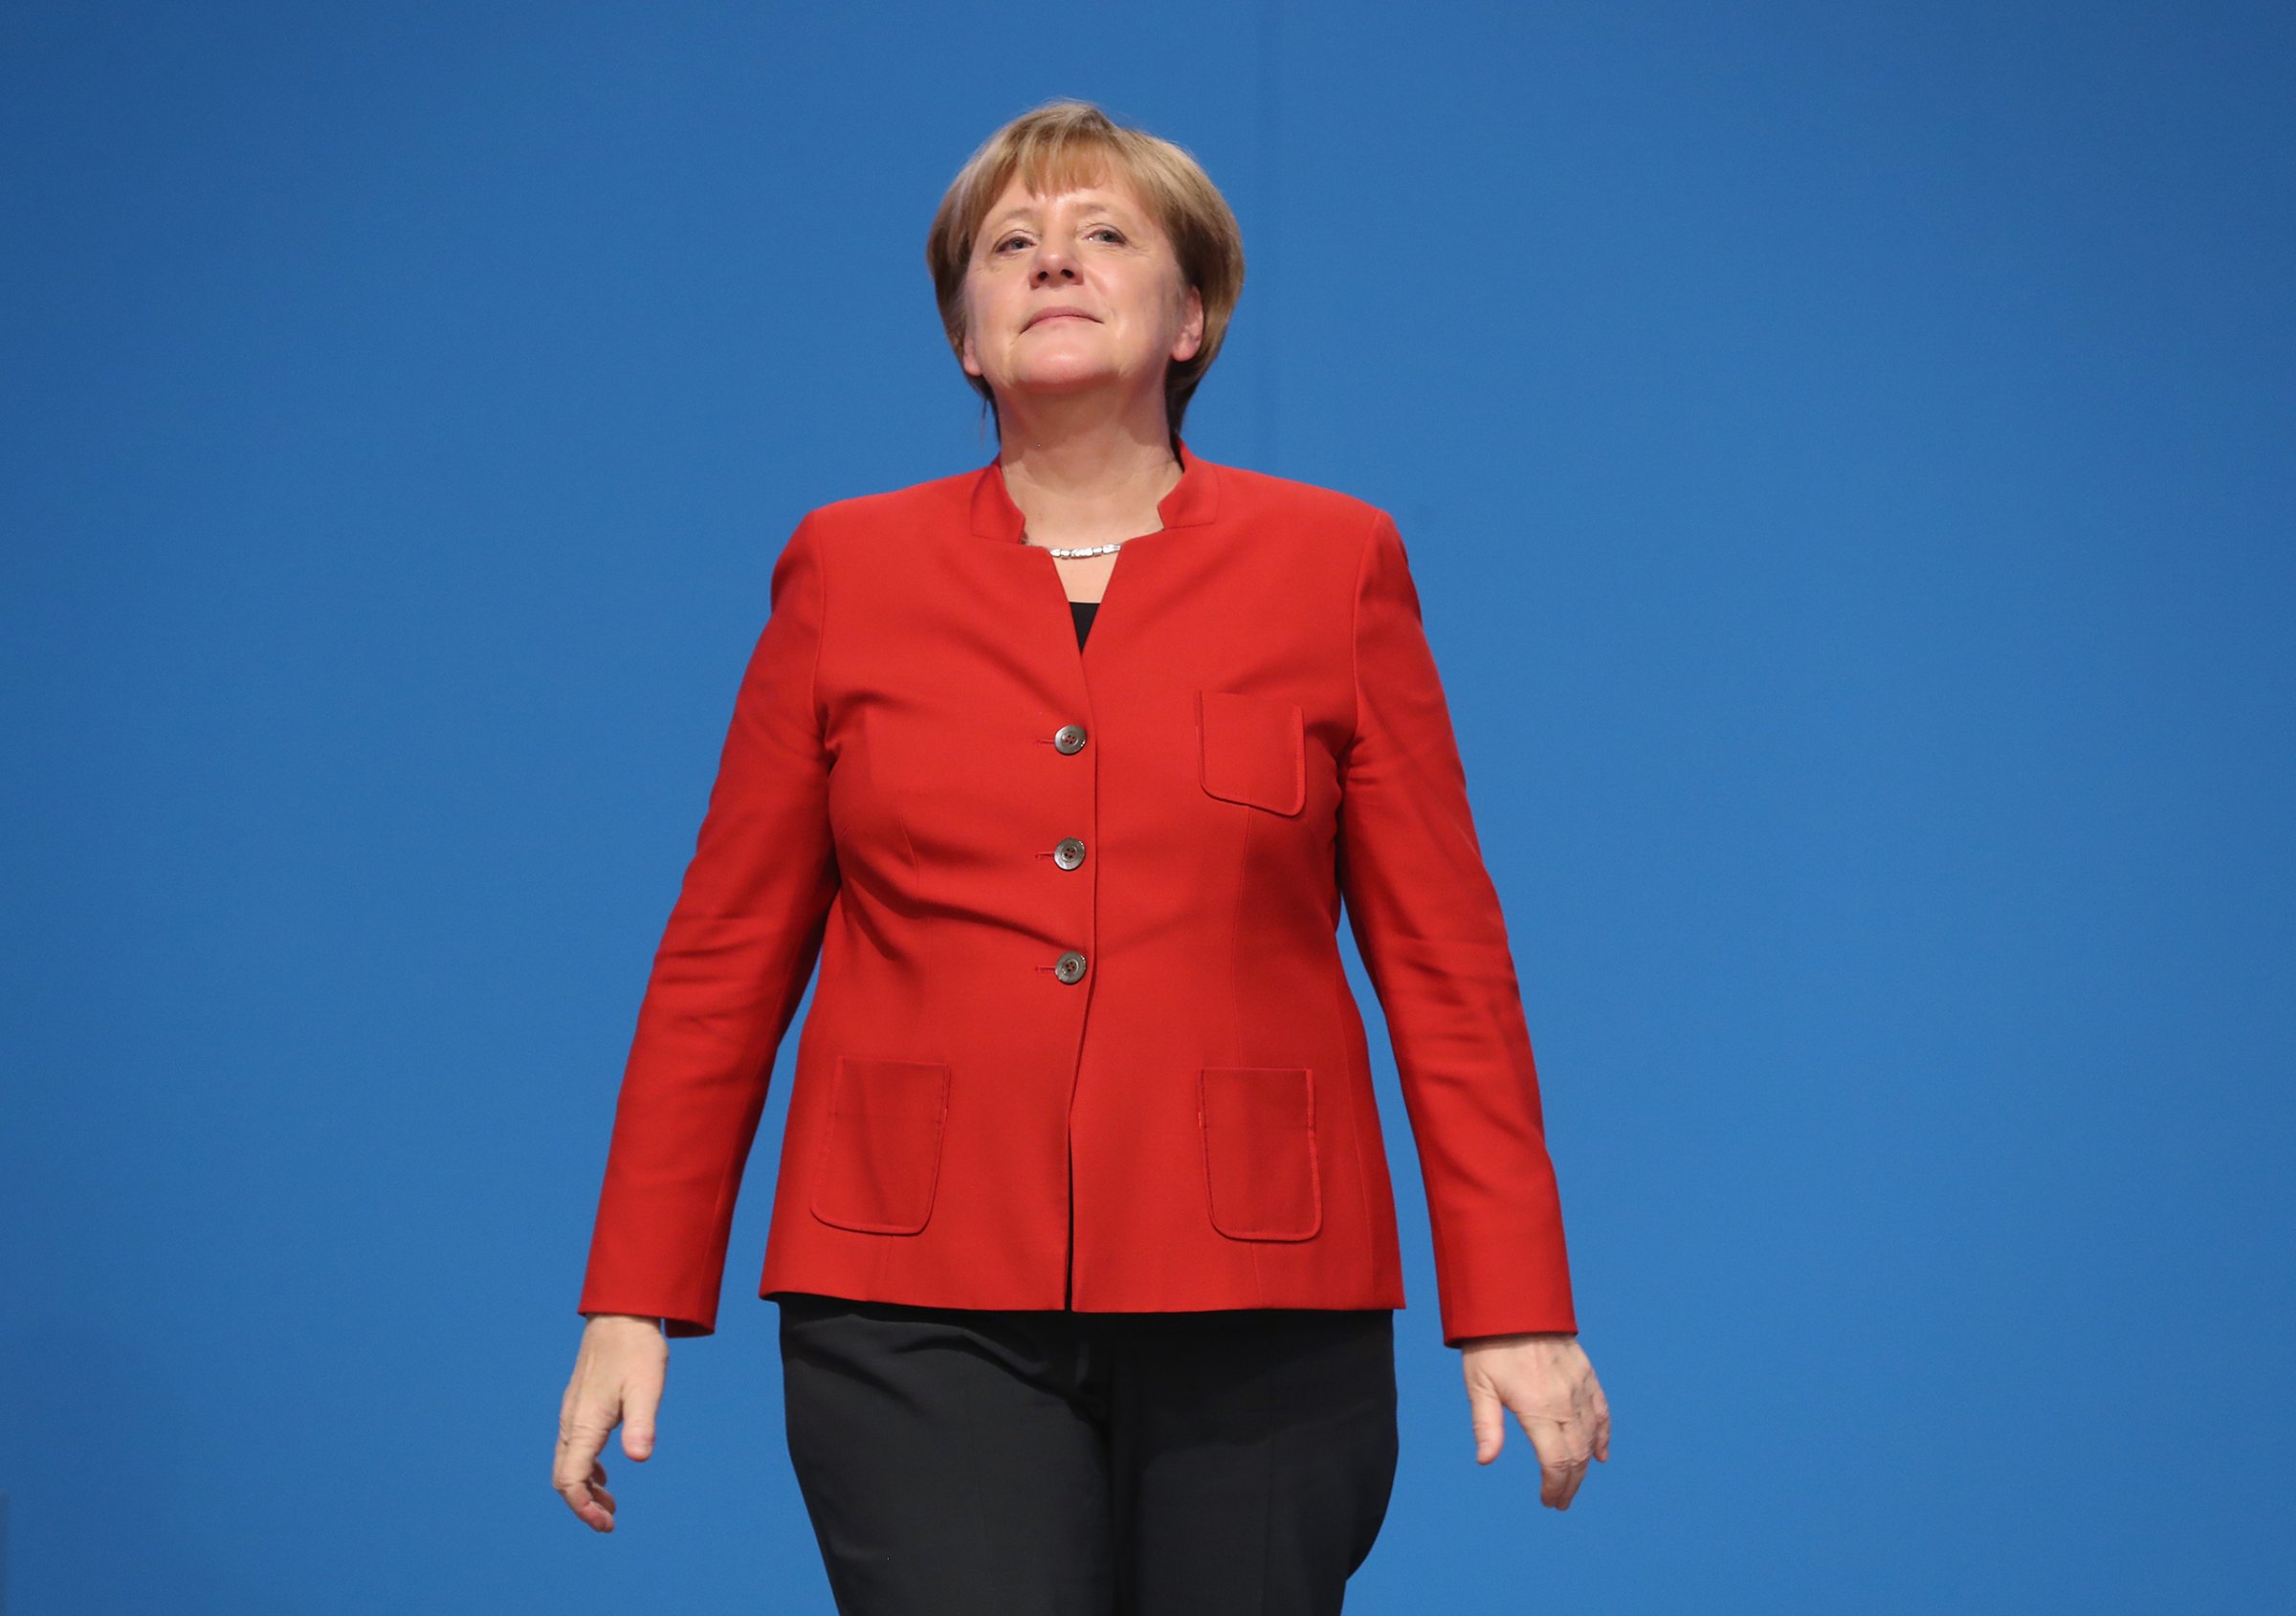 German Chancellor and Chairwoman of the German Christian Democrats Angela Merkel prepares to wave to applauding delegates after she gave her central speech at the 29th federal congress of the CDU in Essen, Germany, on Dec. 6, 2016.